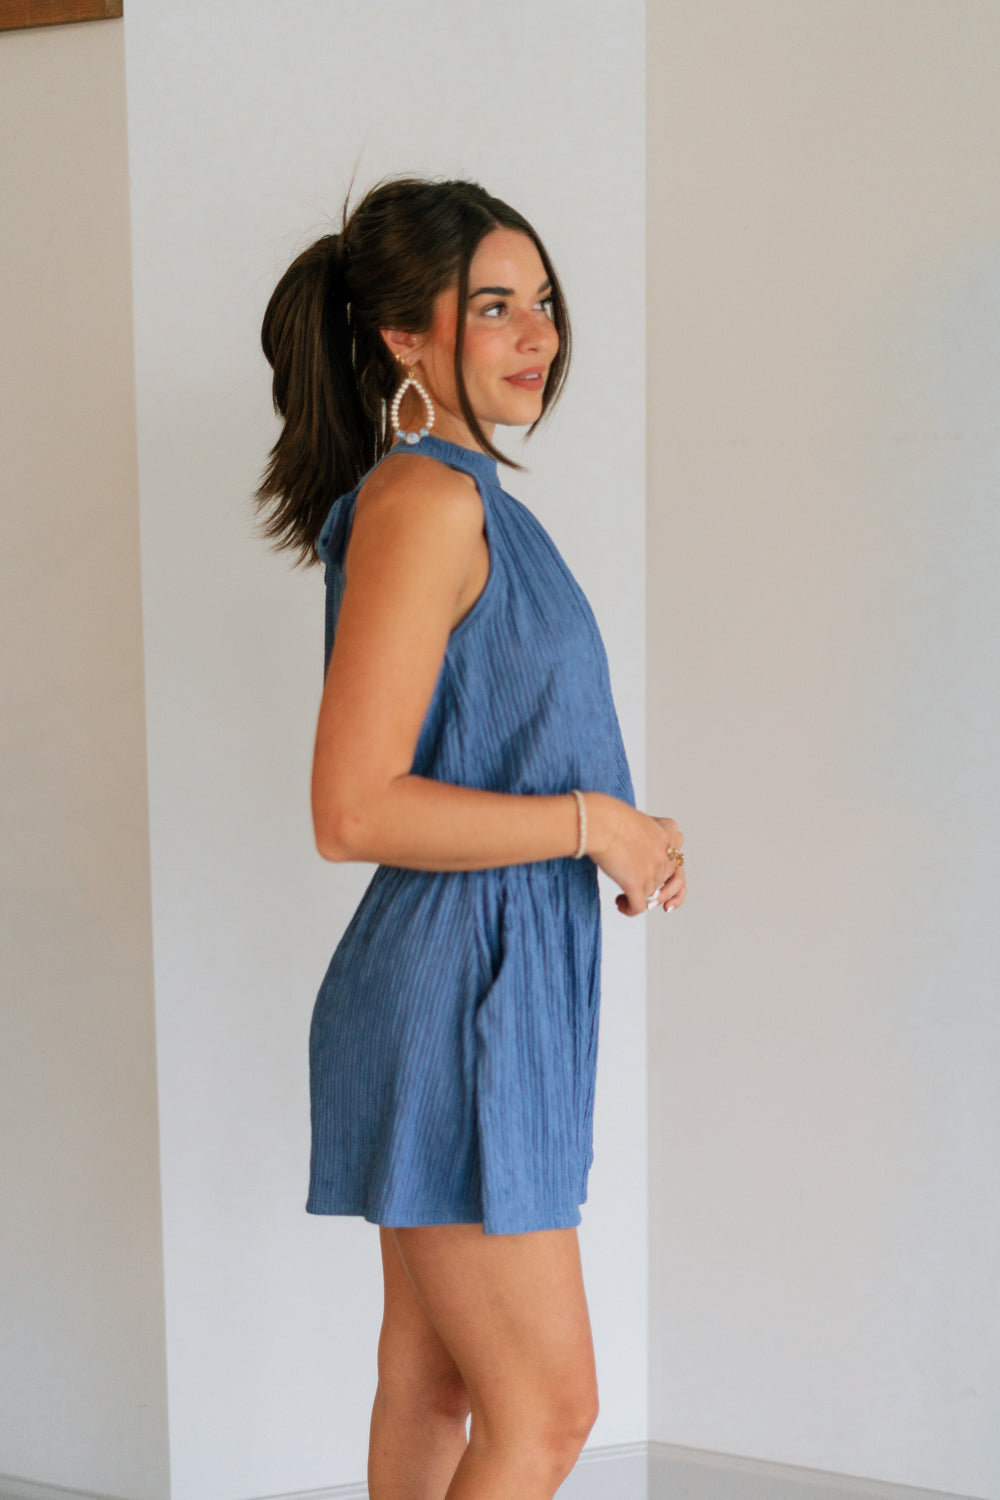 Side view of female model wearing the Leila Dark Blue Halter Neckline Romper which features Grey Blue Textured Fabric, Two Side Slit Pockets, Halter Neckline with Tie, Elastic Waistband and Back Key Hole